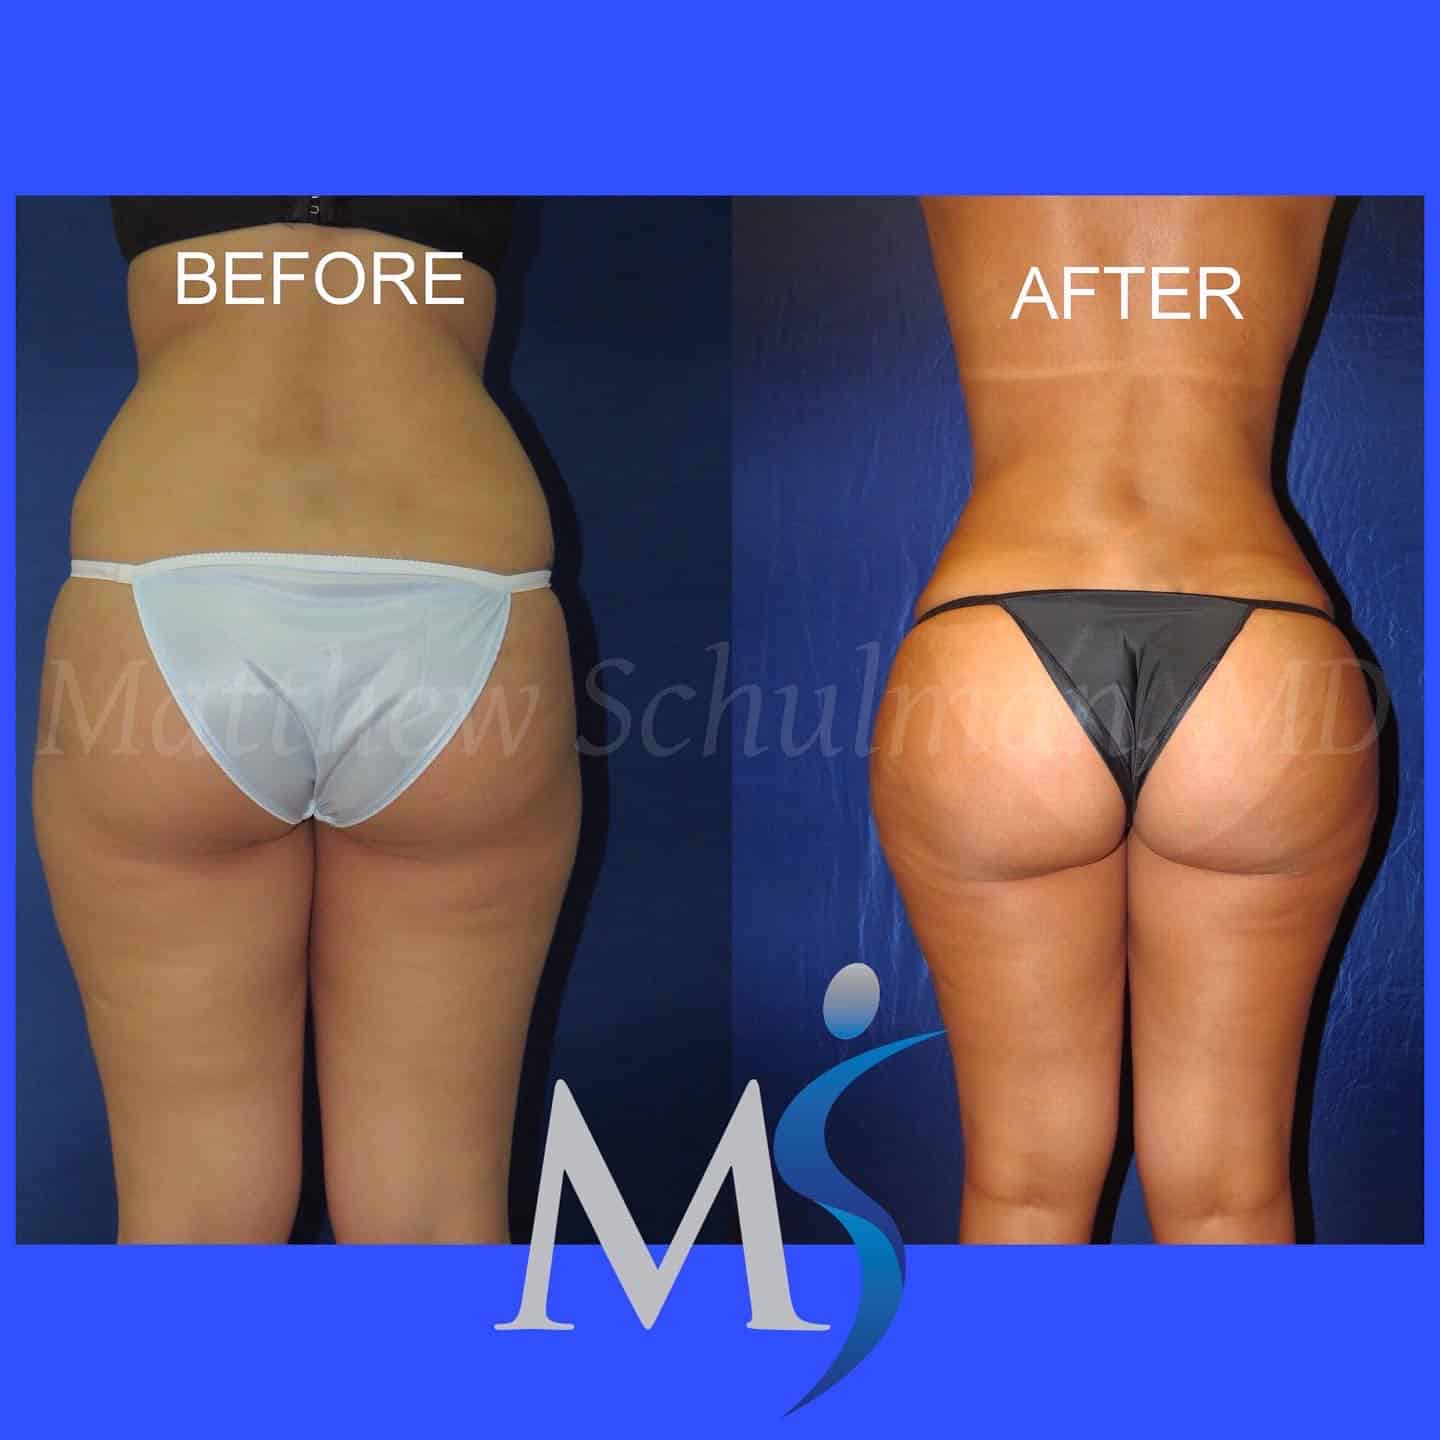 Lipo 360 Before and After: What to Expect